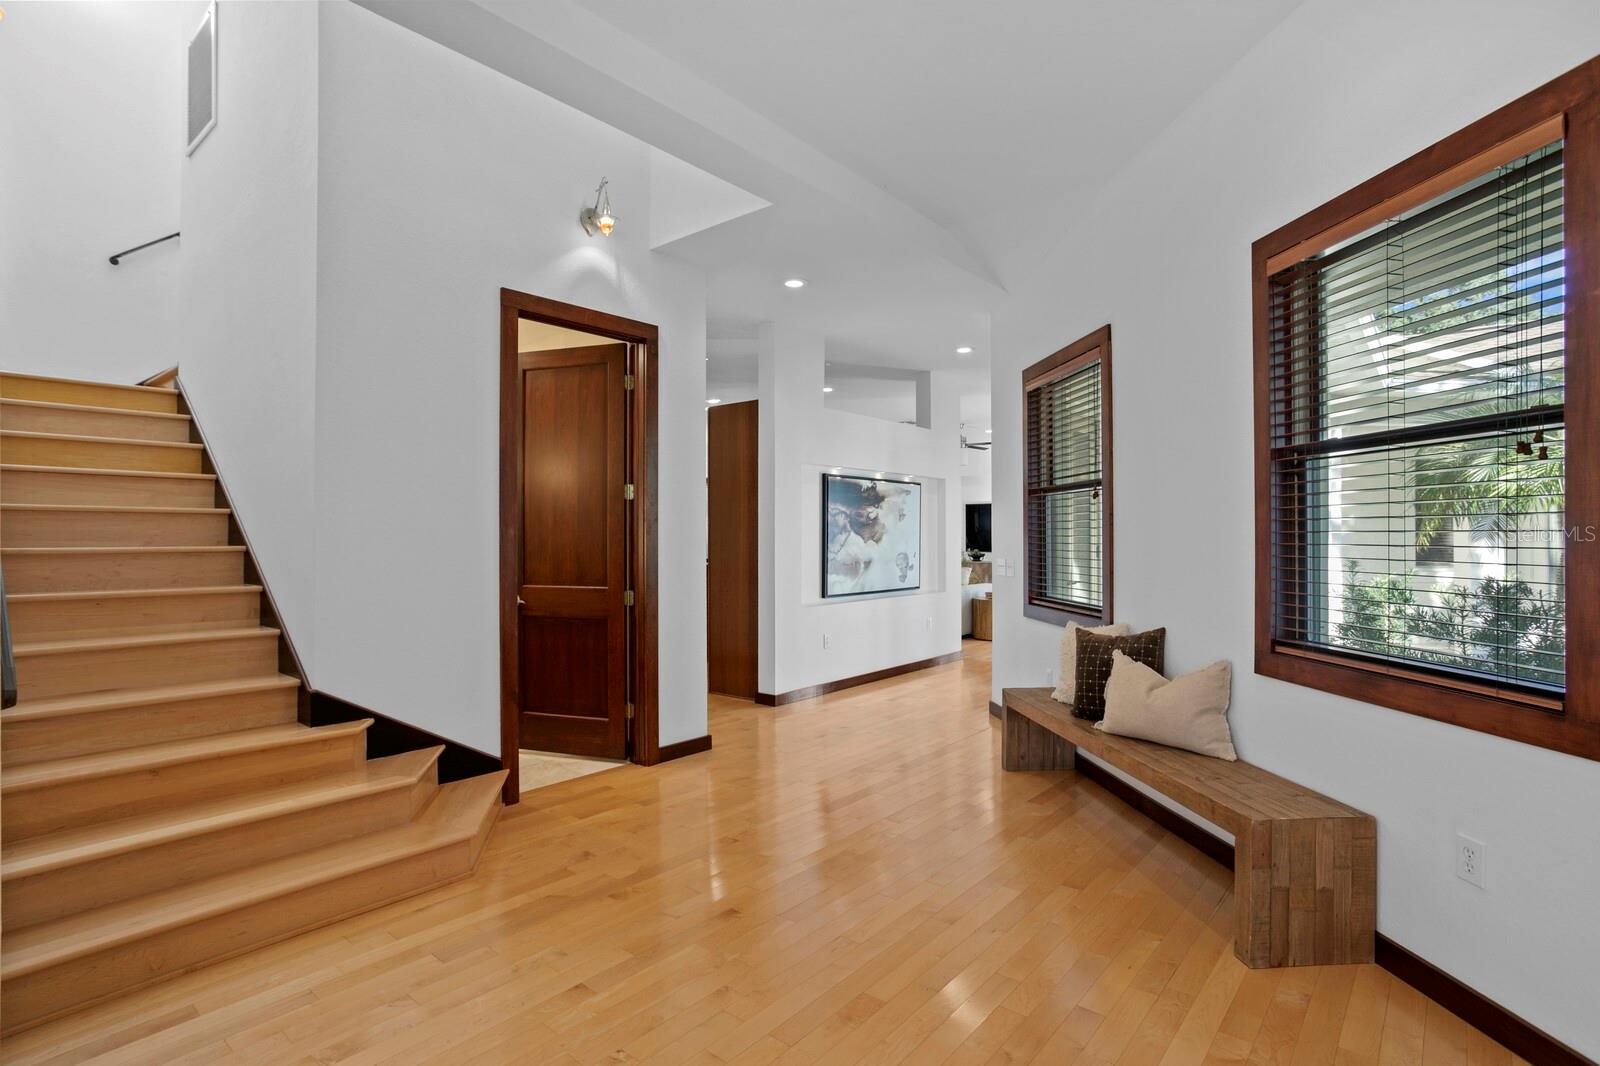 Beautiful Maple hardwood floors throughout all of the main living areas